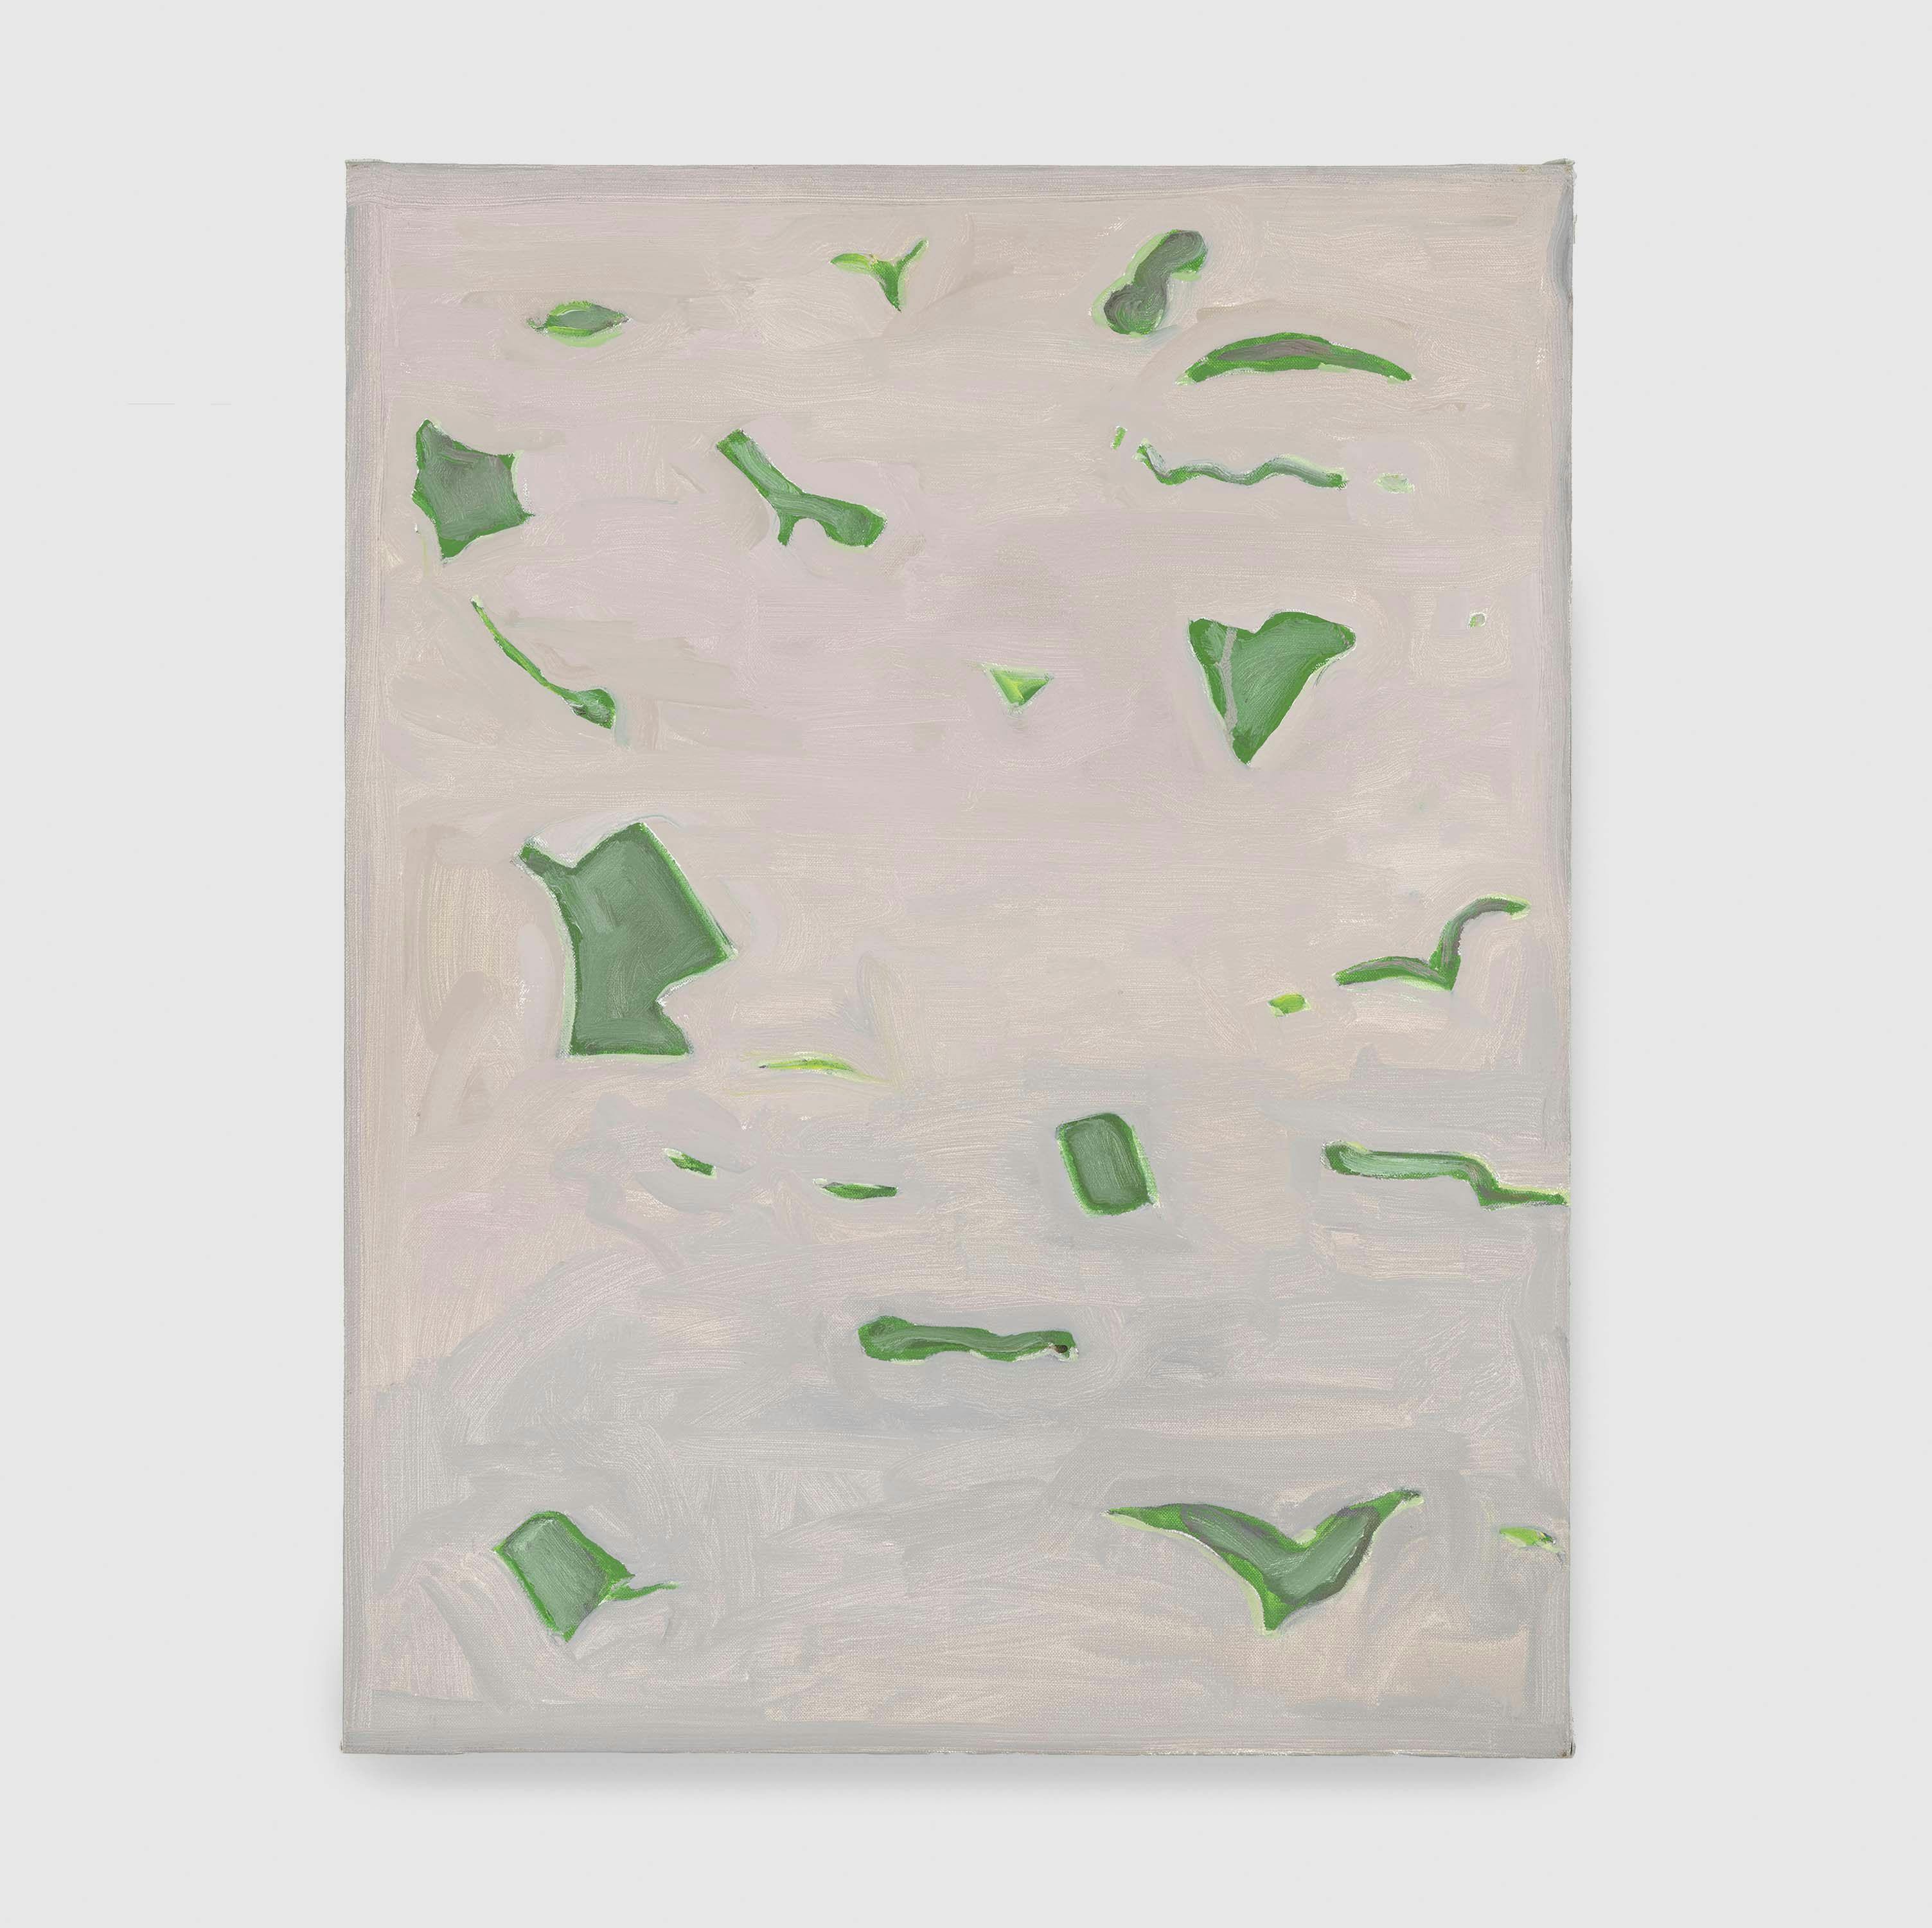 A painting by Raoul De Keyser, titled Avondversie, dated 2003.